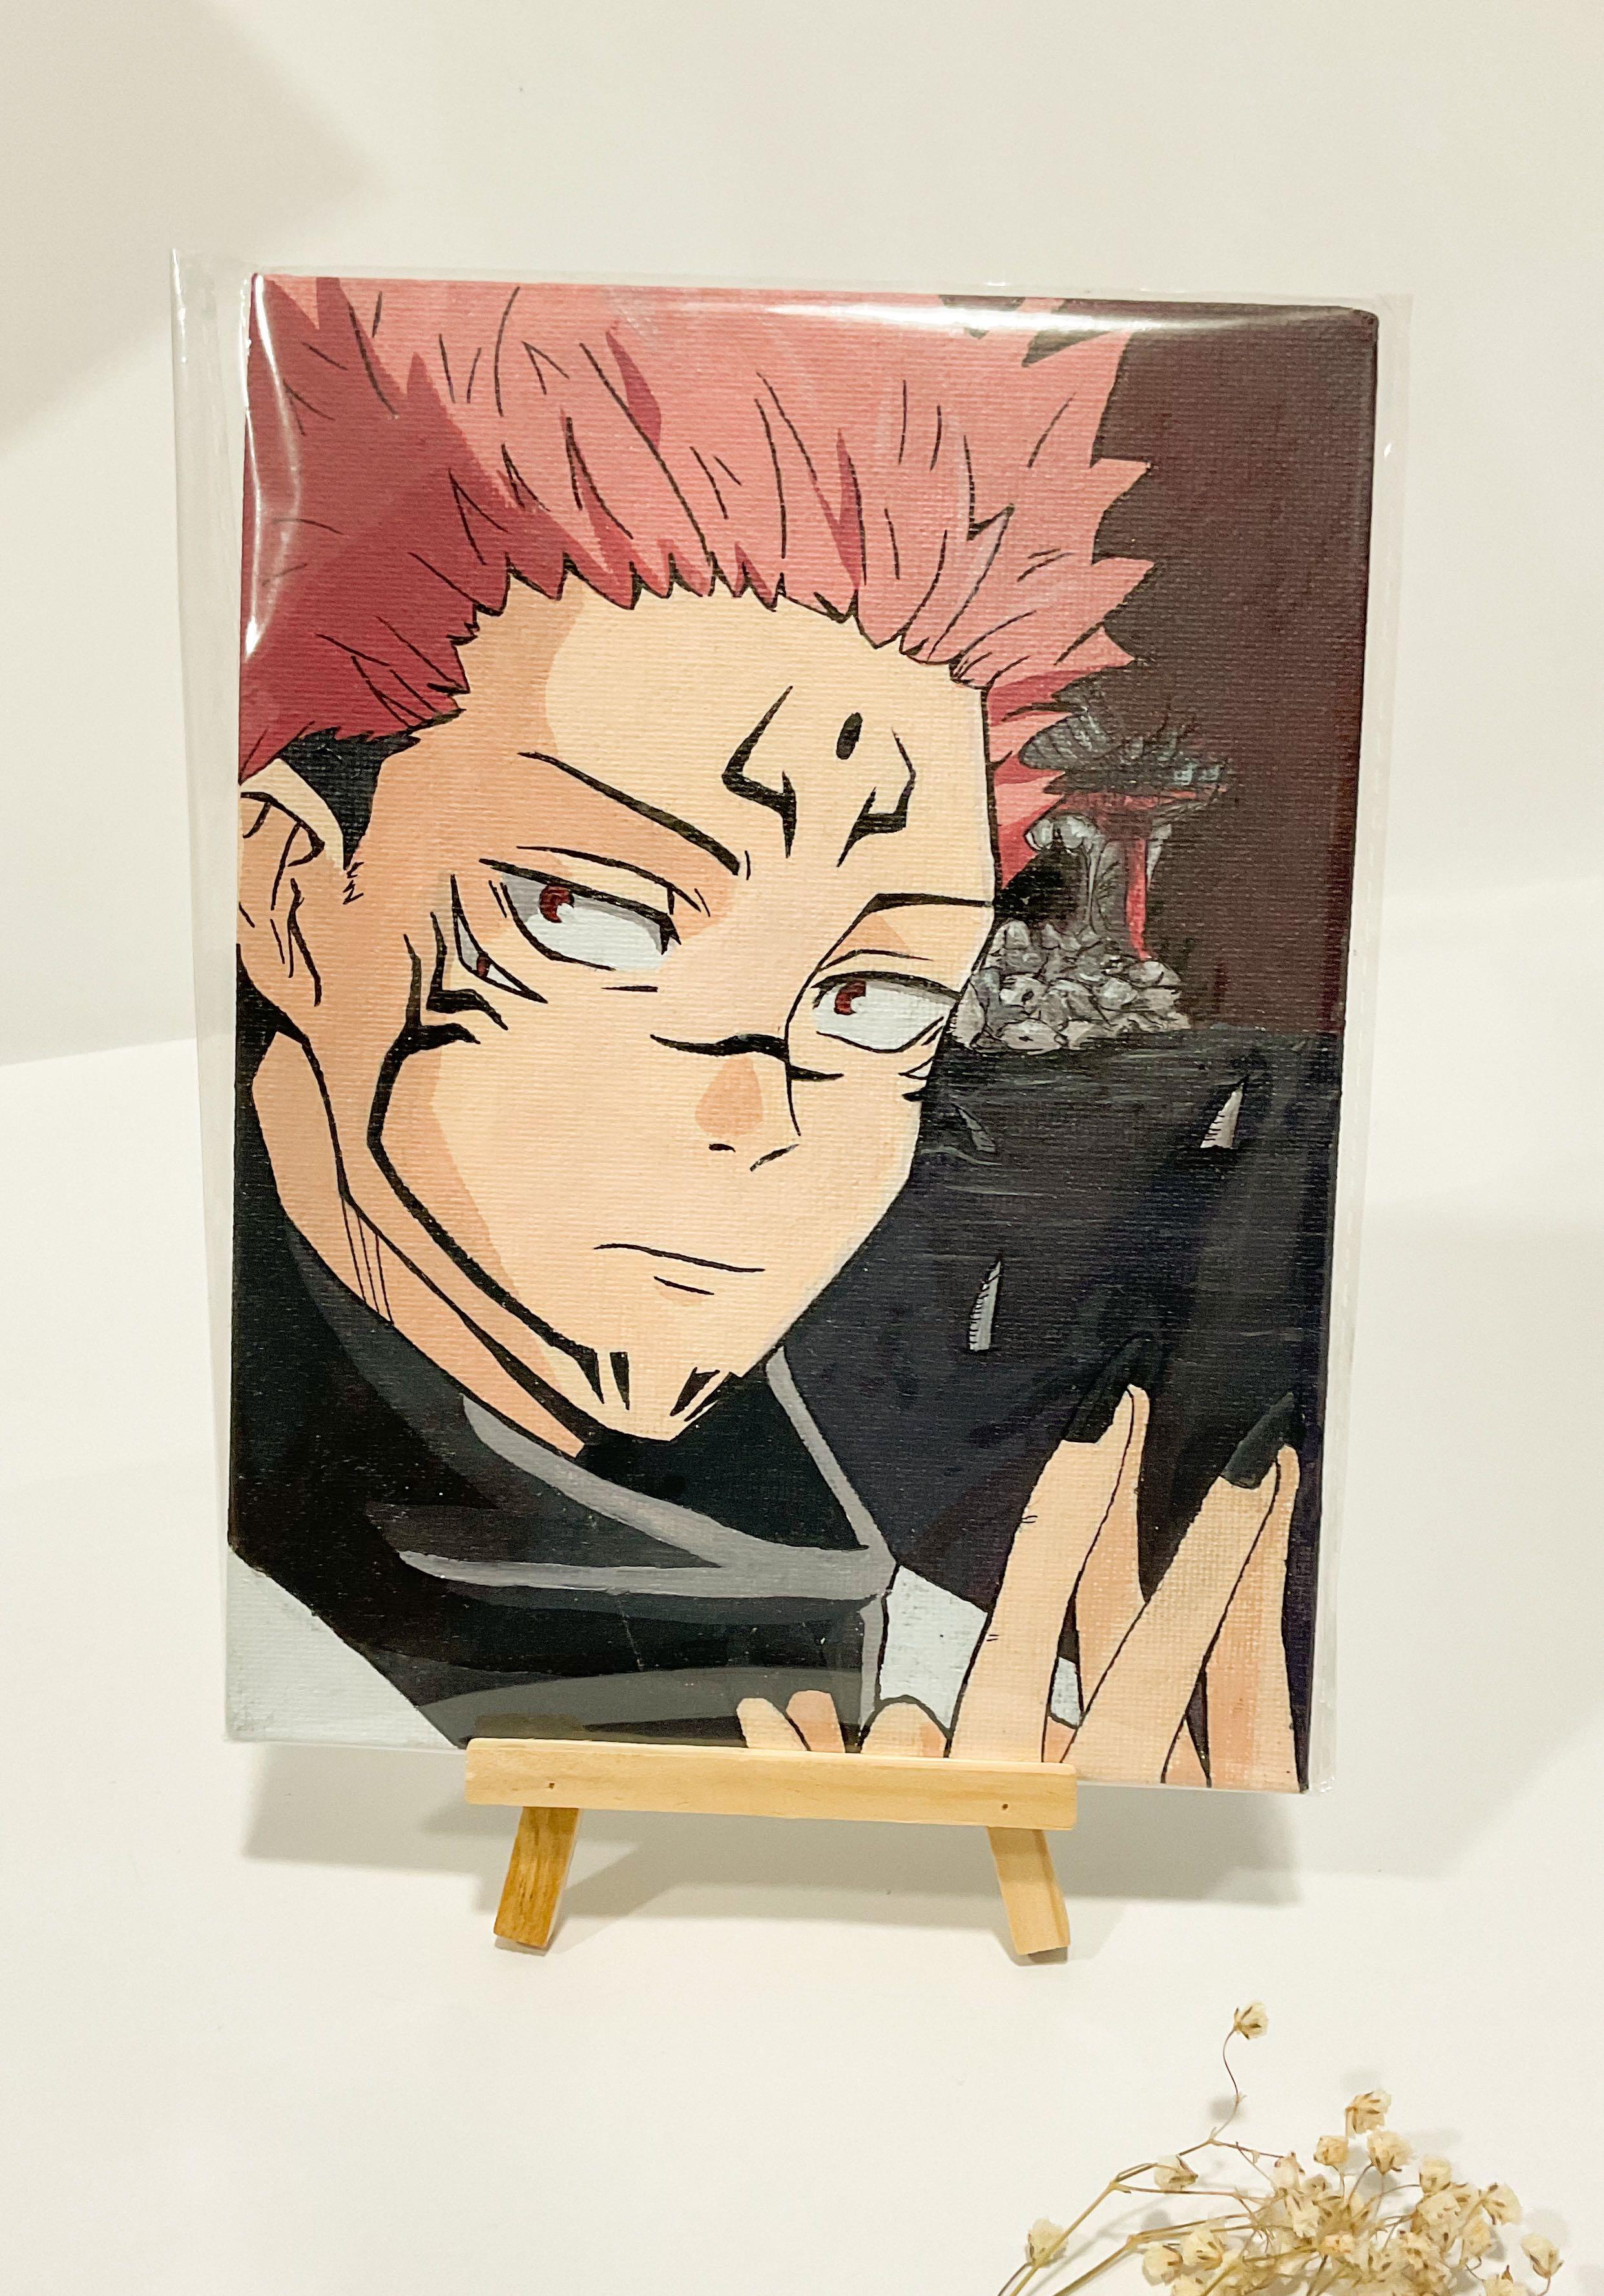 Share 67+ anime canvas painting - in.cdgdbentre